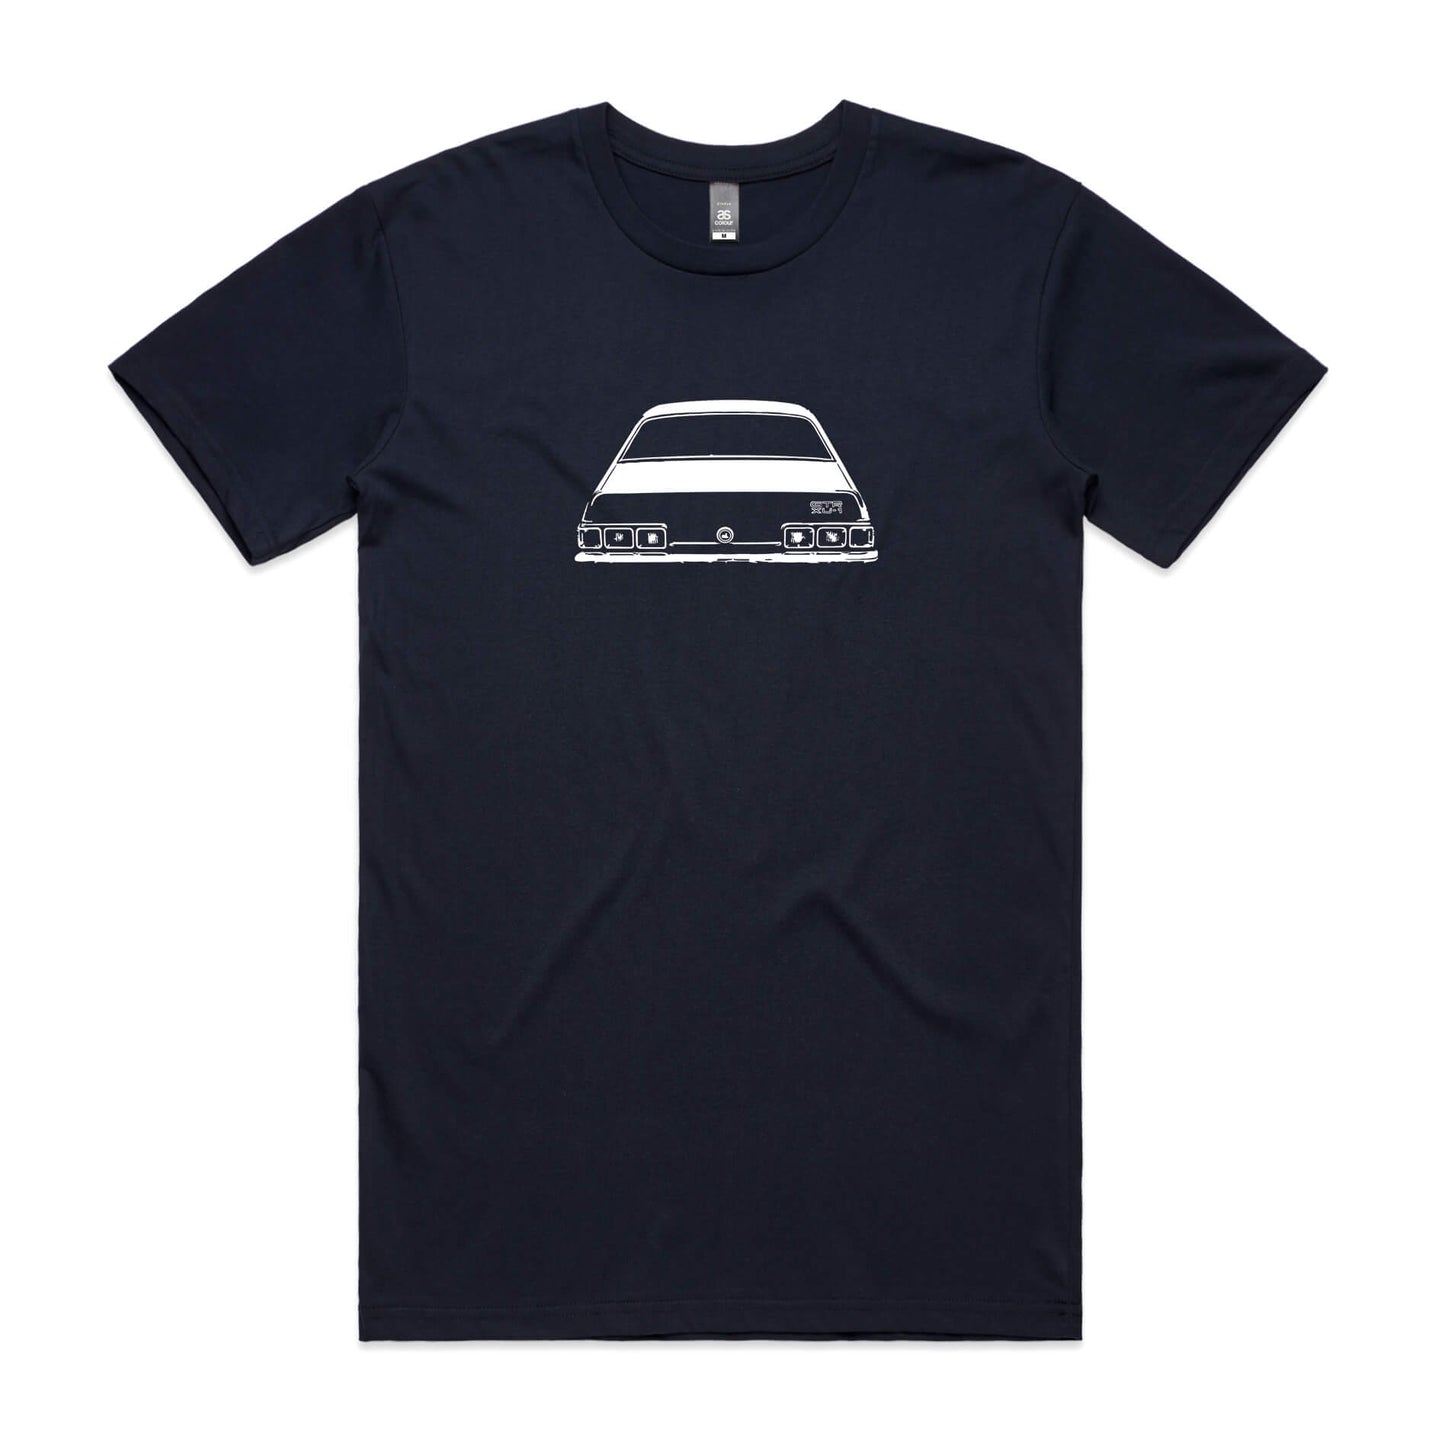 Holden LJ Torana t-shirt in navy blue with a white graphic of the GTR XU1 car